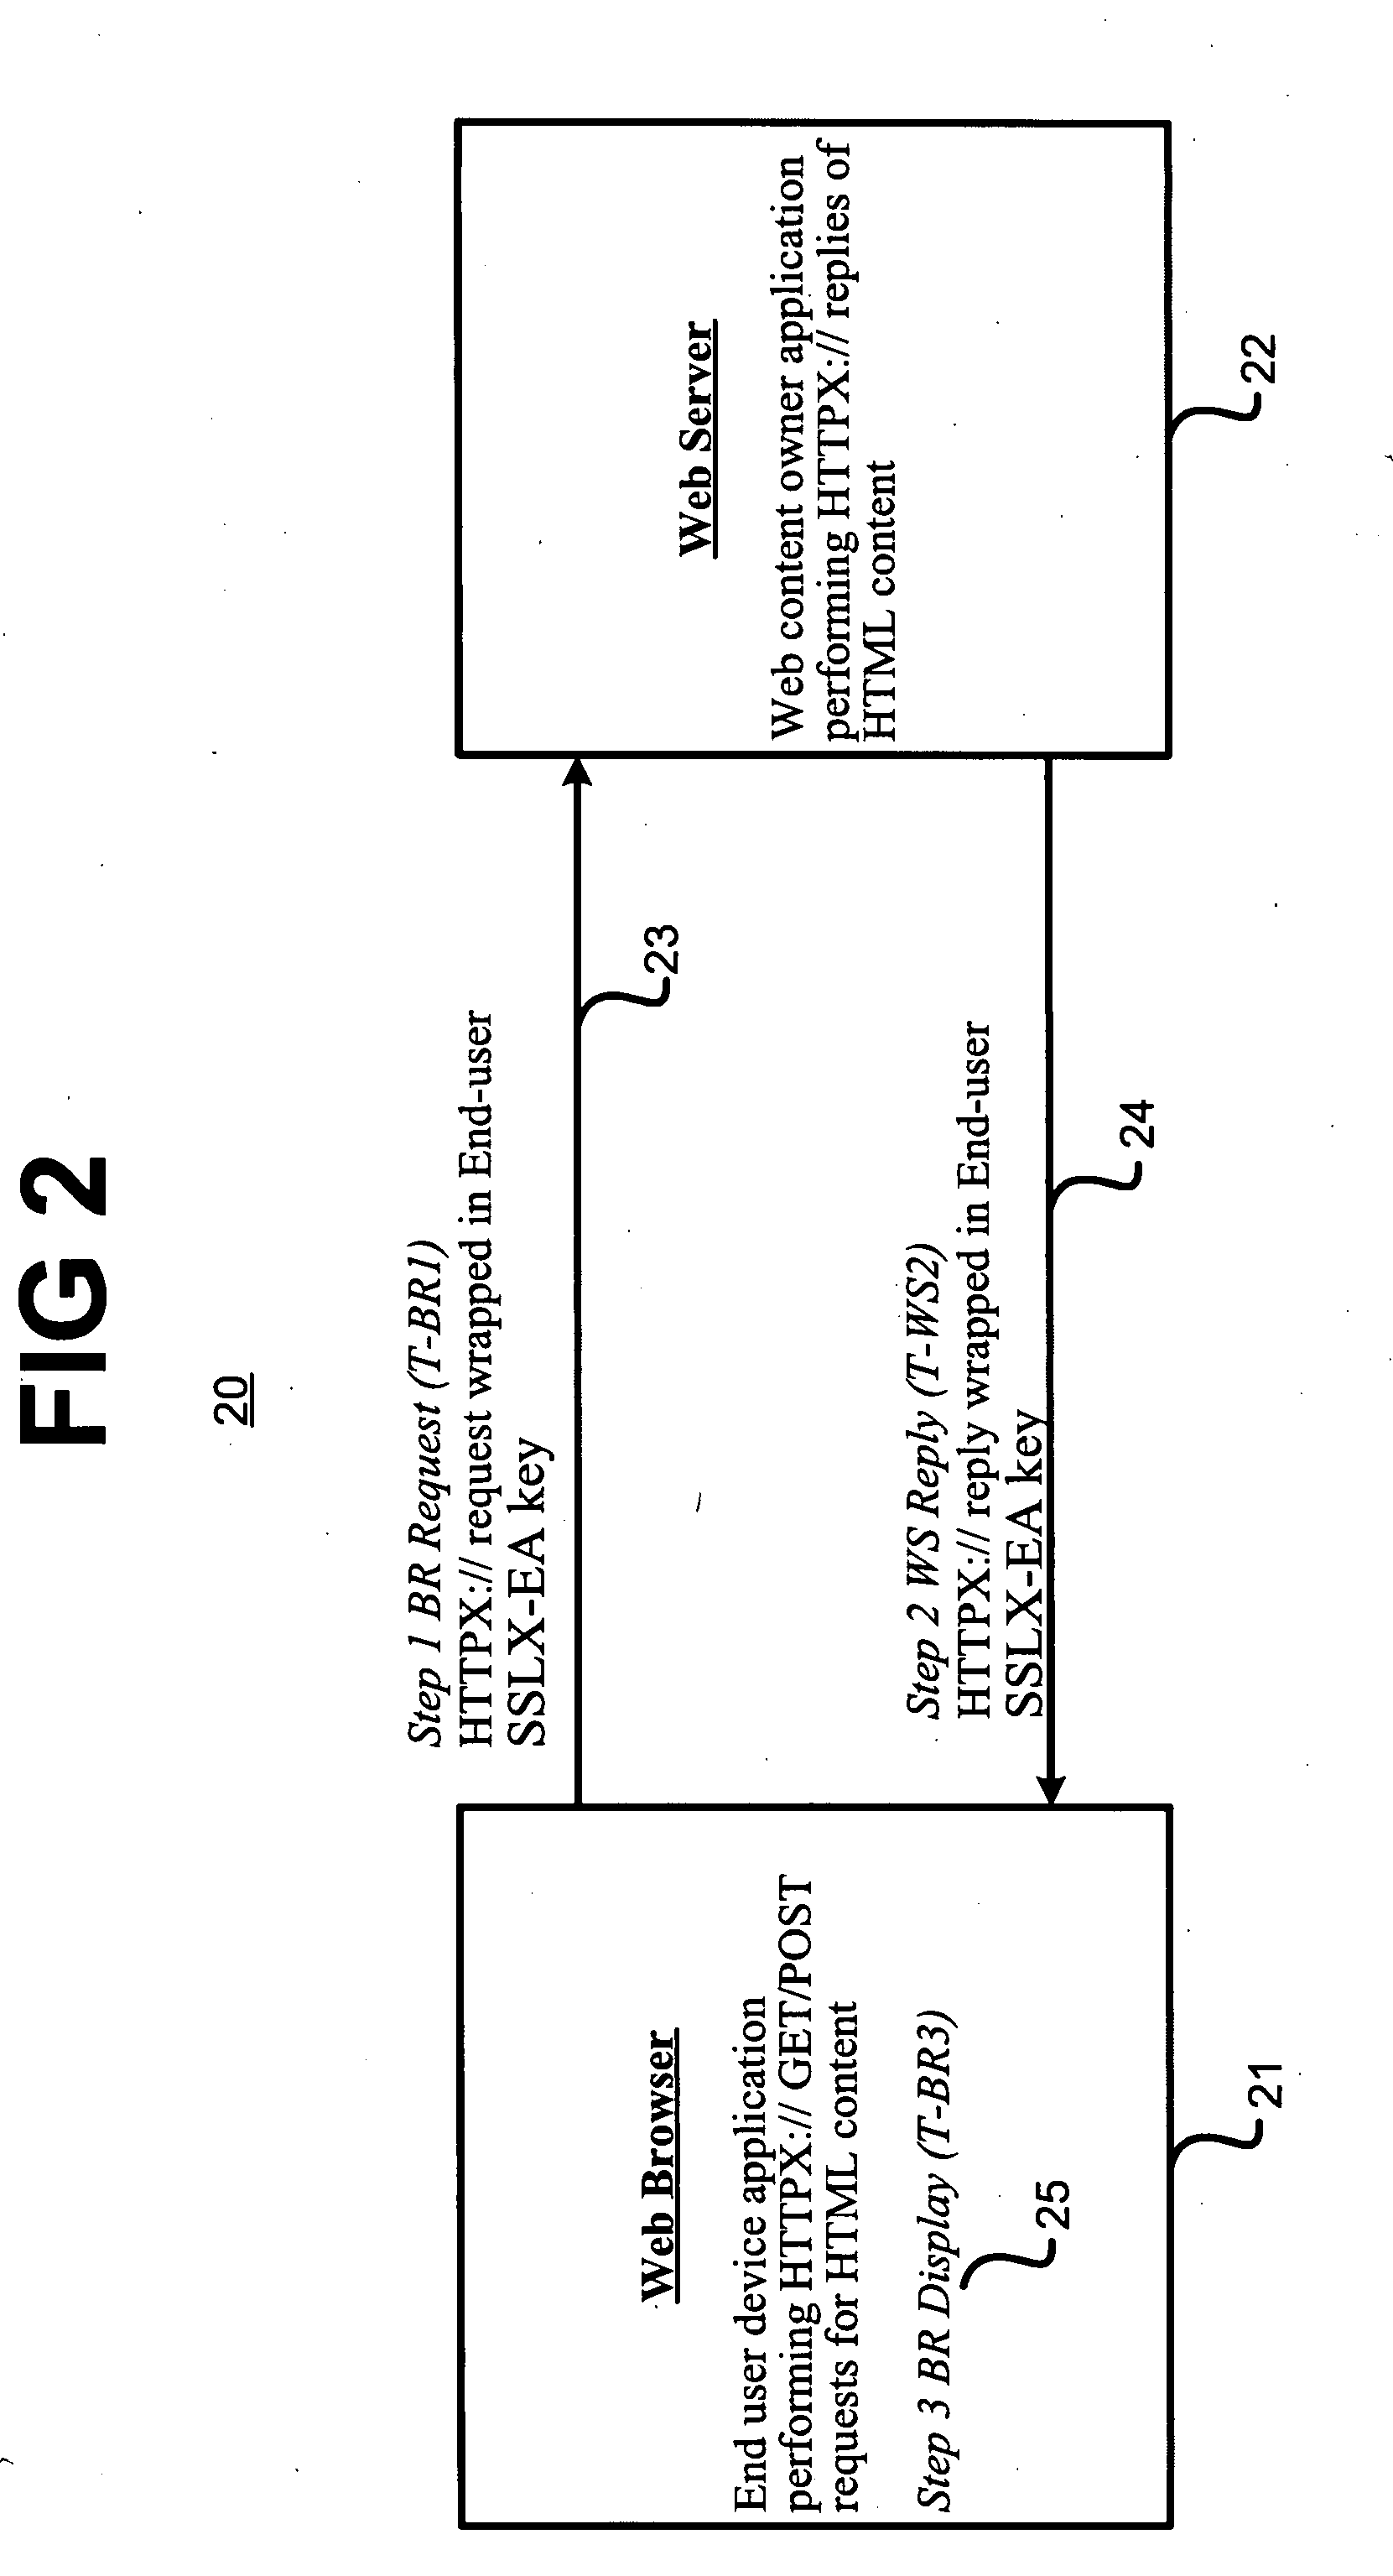 Method and system for providing authentication service for Internet users